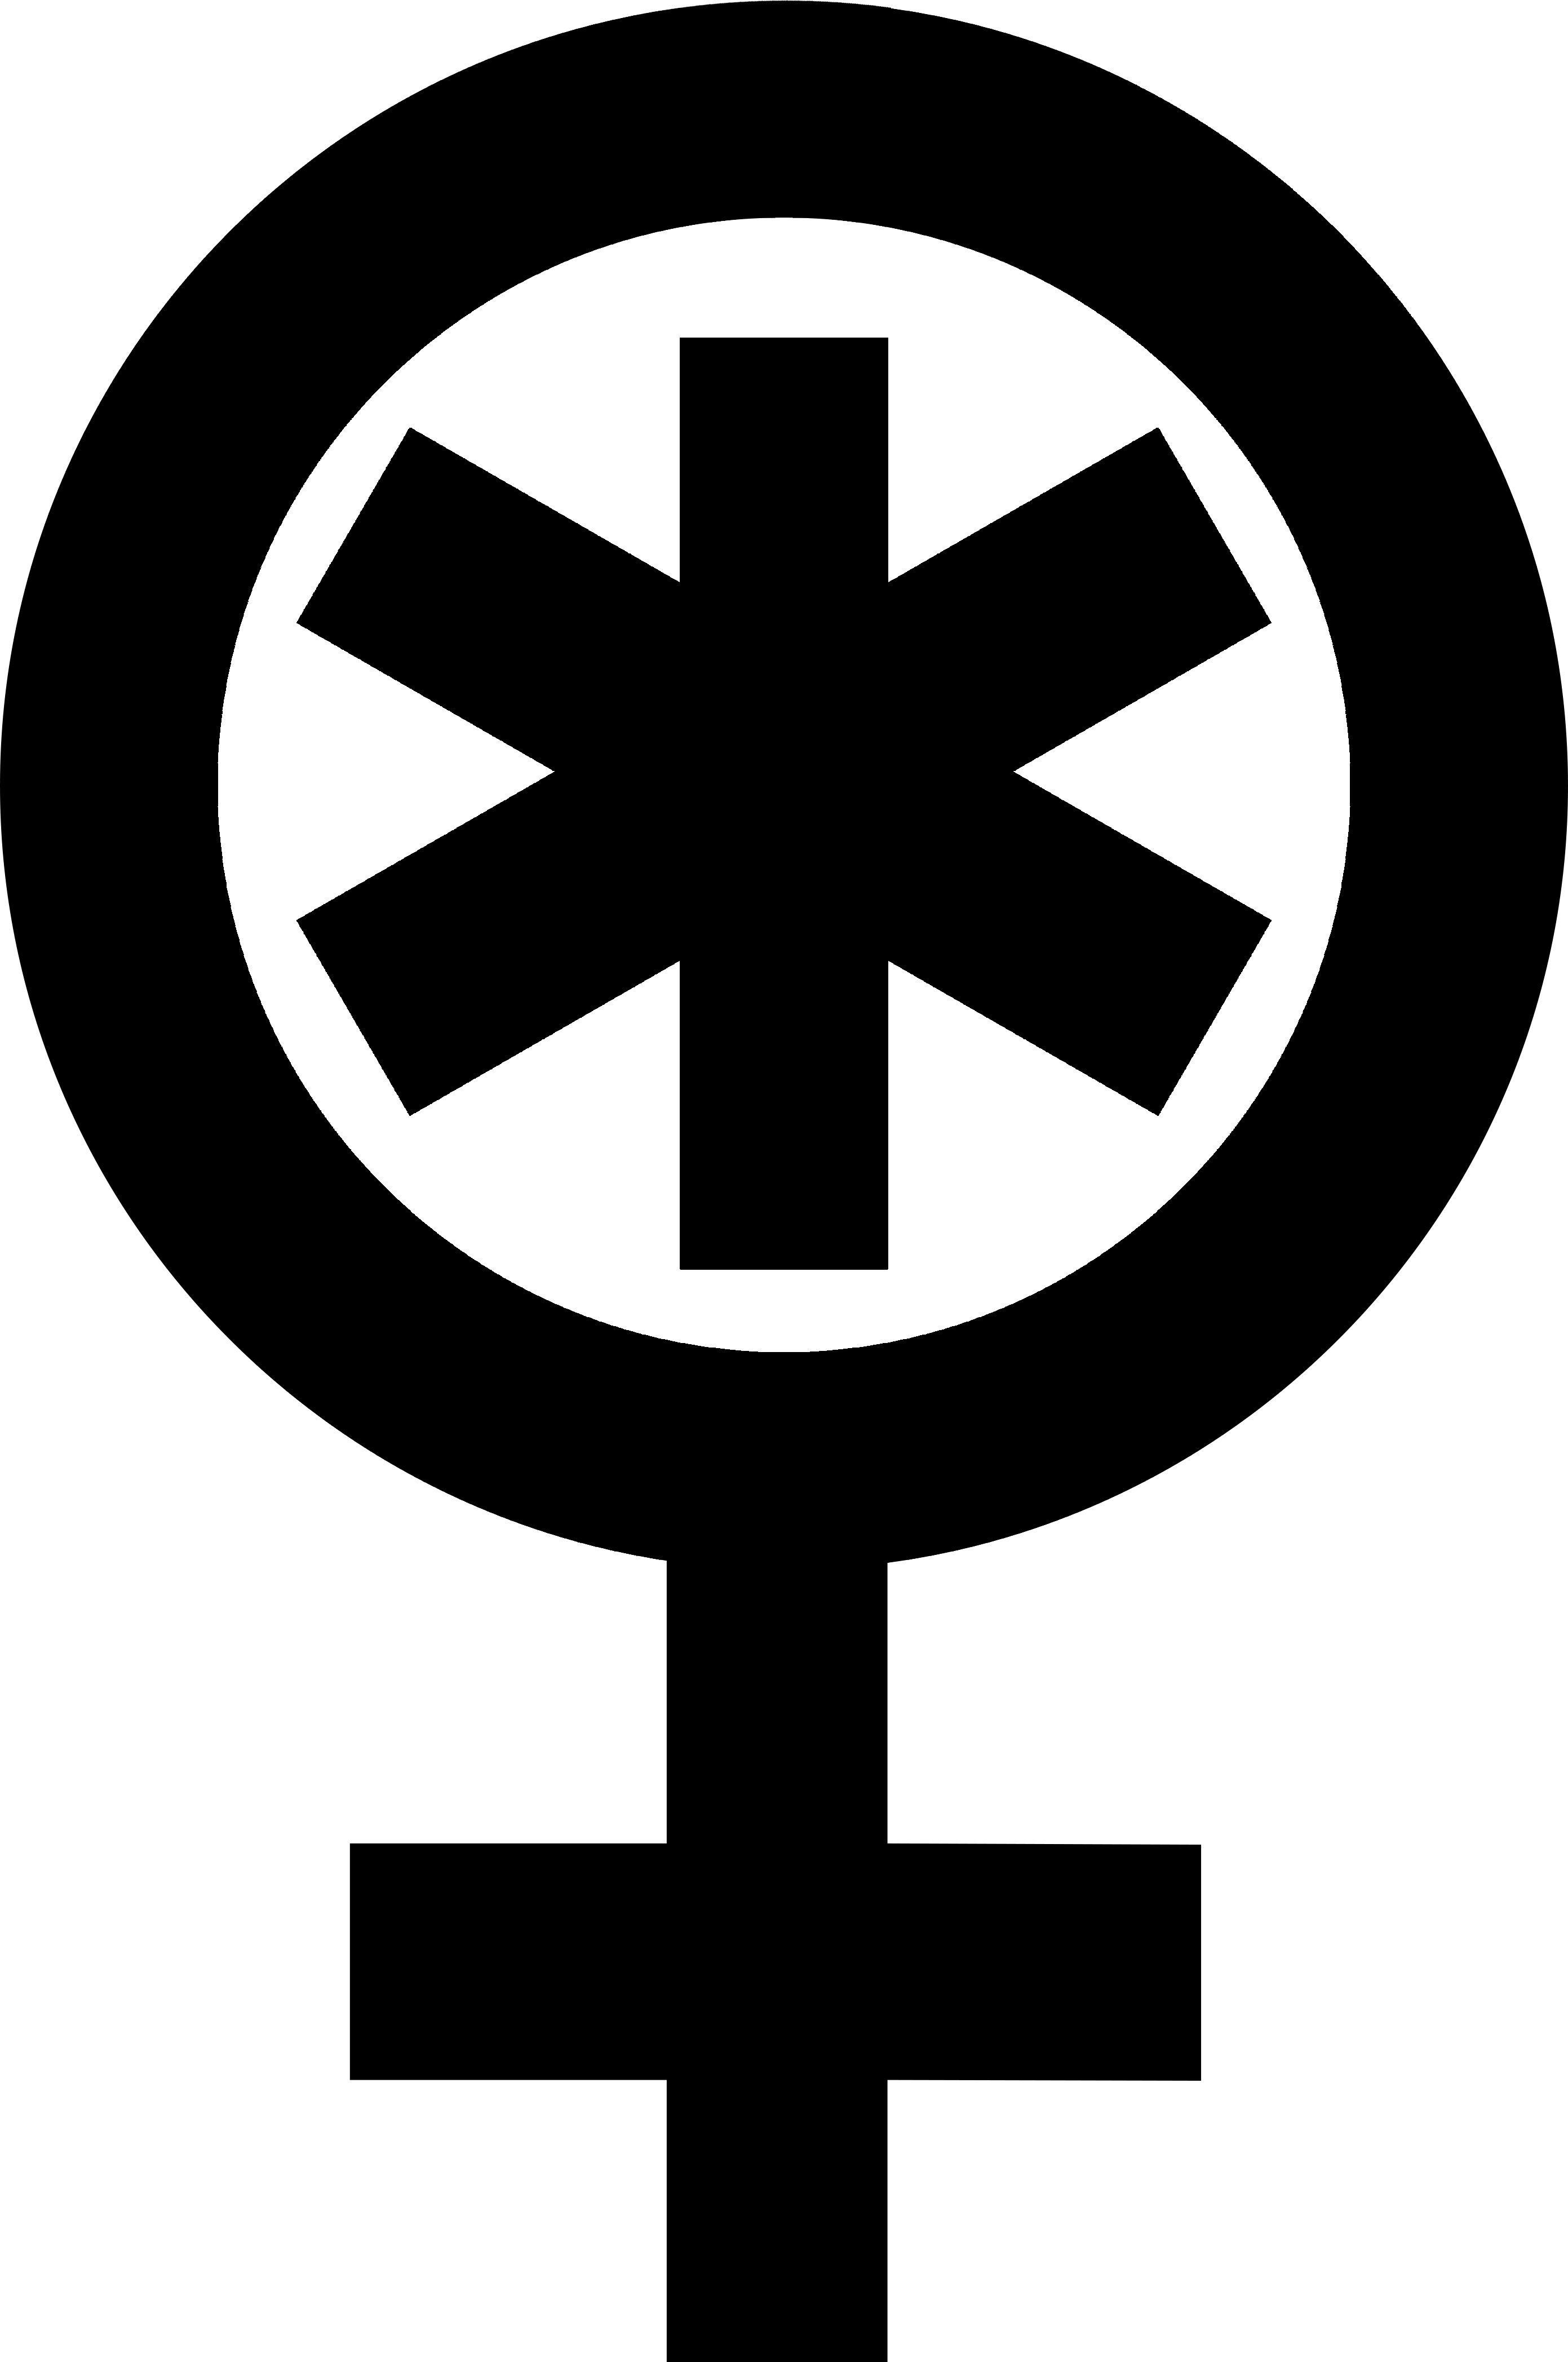 A Venus symbol (circle with an upside-down cross coming out from its border towards down) with an asterisk within the circle.